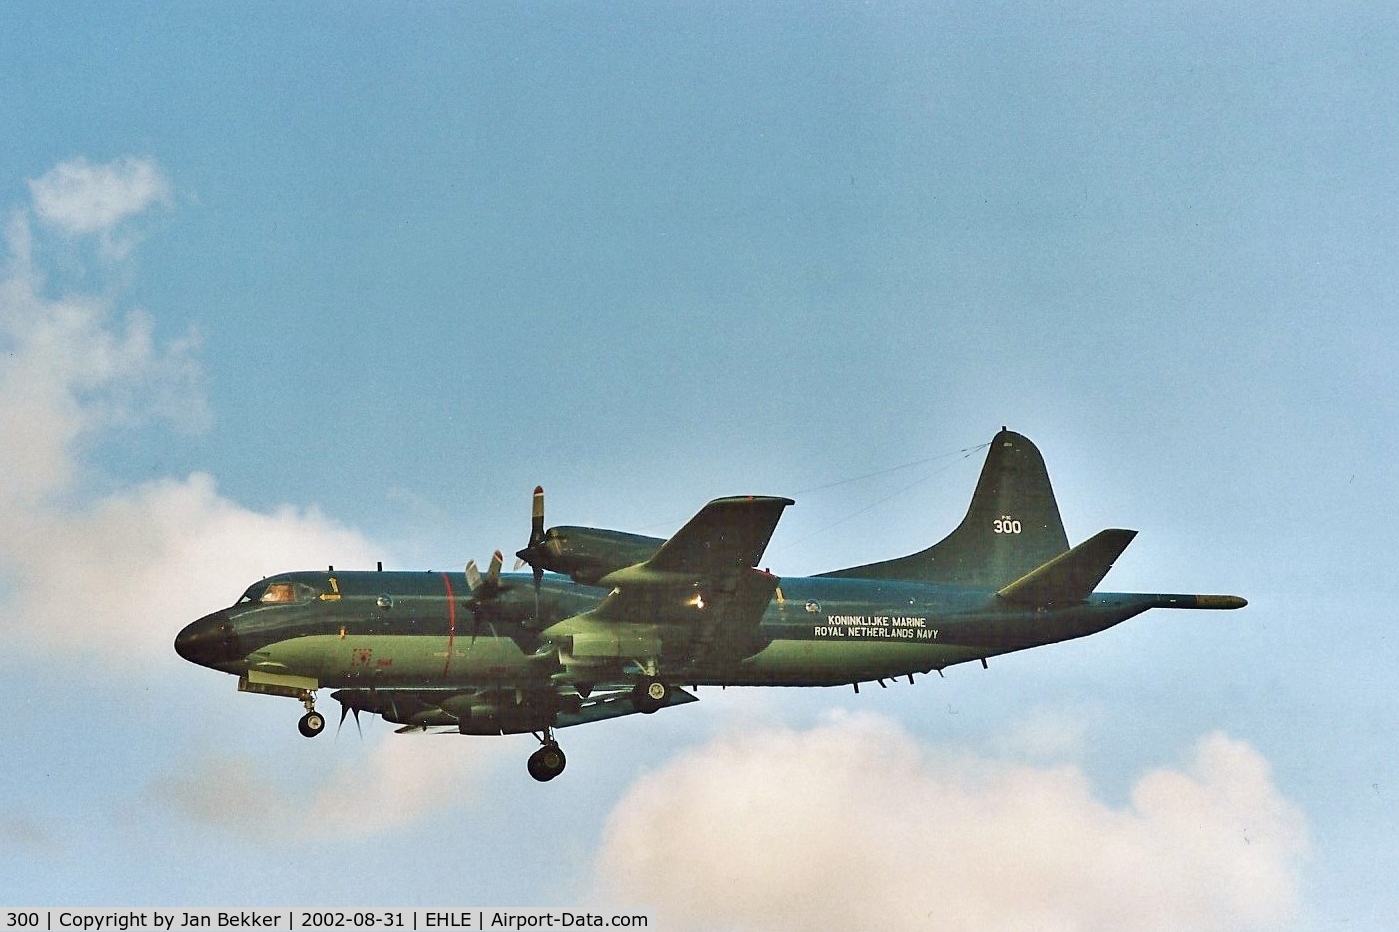 300, 1981 Lockheed P-3C-II-5 Orion C/N 285E-5733, During a Flypass over lelystad Airport in 2002